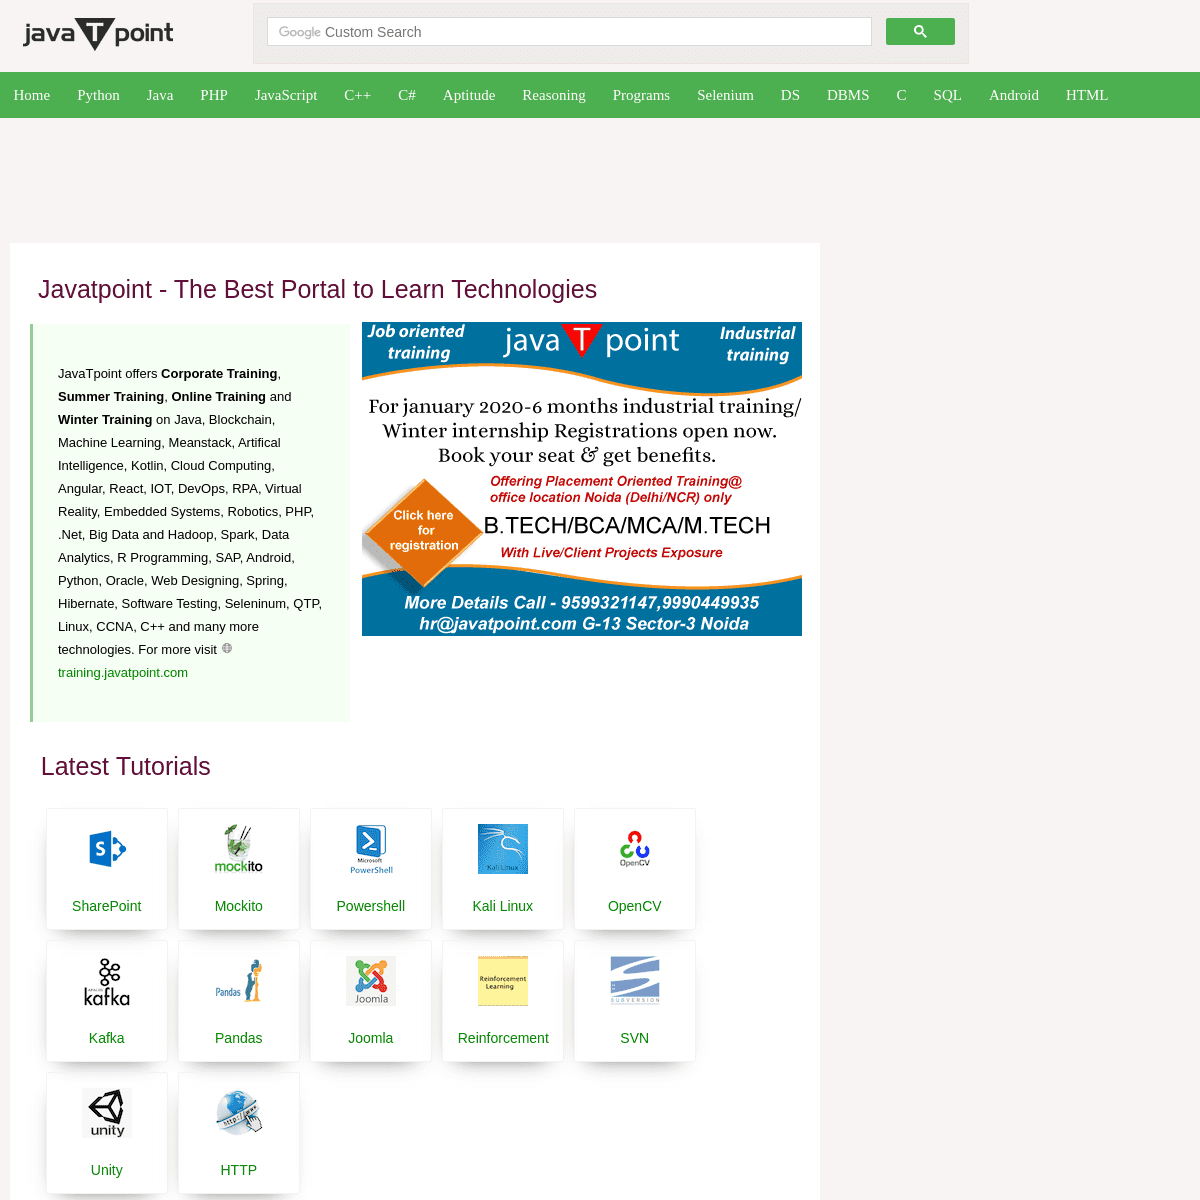 A complete backup of javatpoint.com